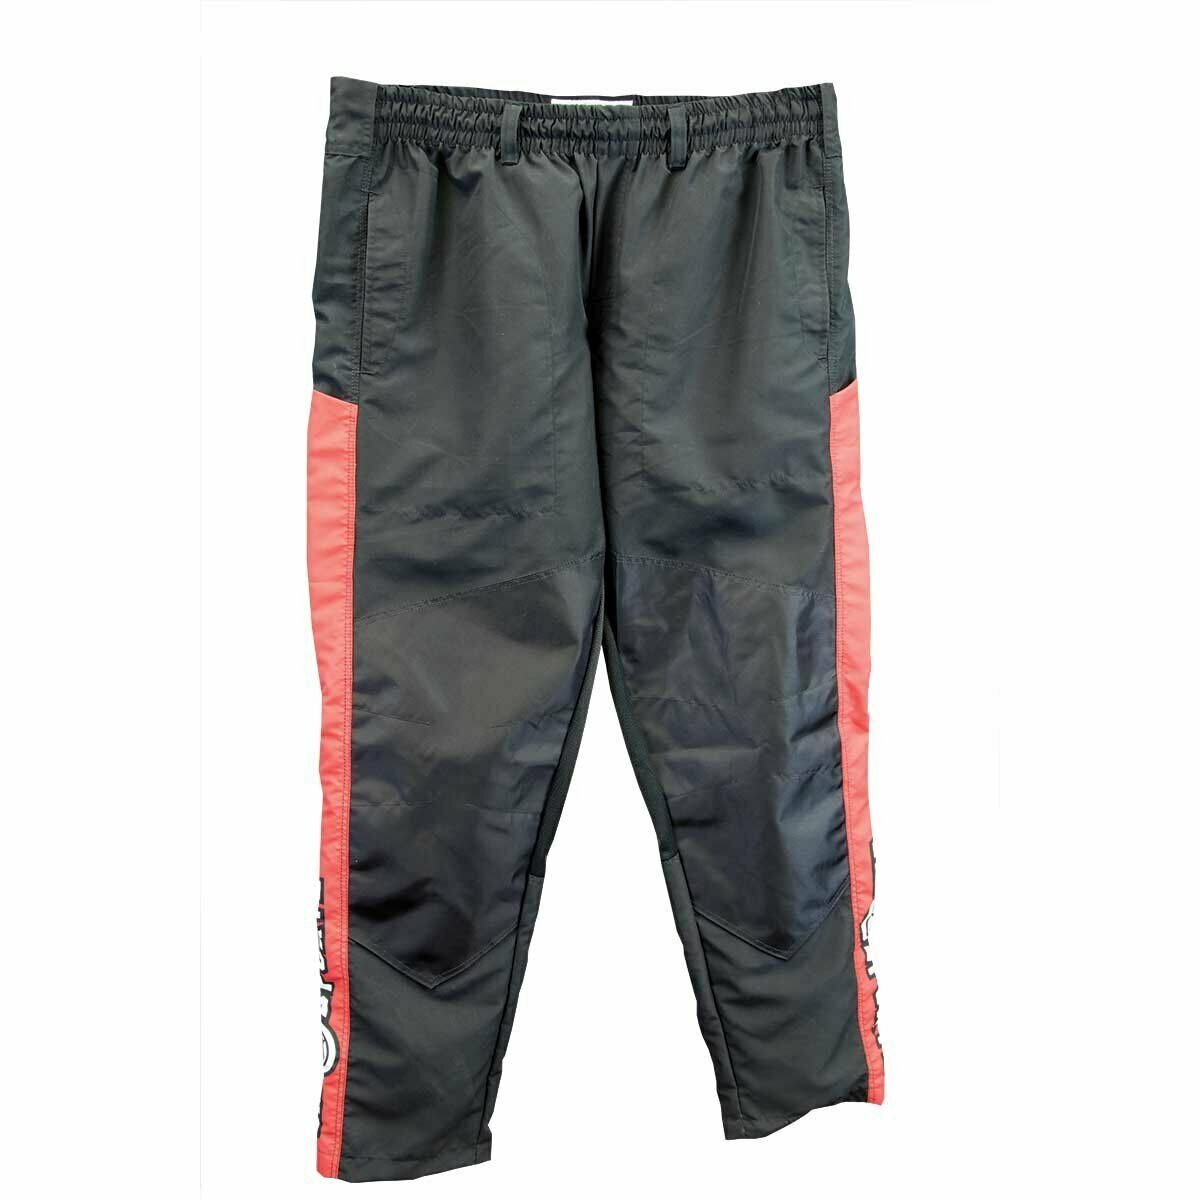 GI Sportz Grind Paintball Pants - Black/Red - Small